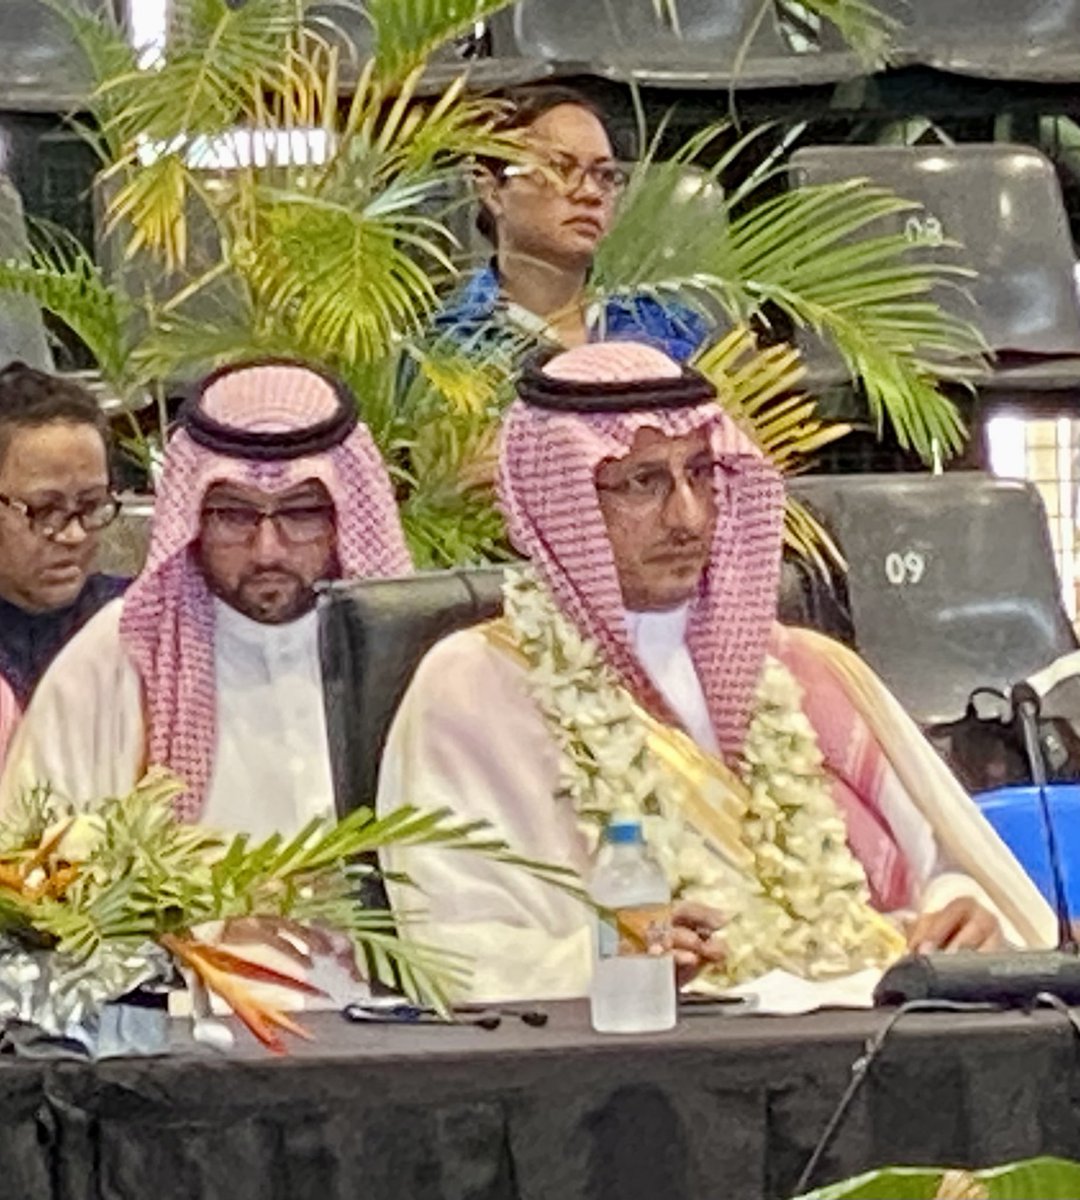 Here at @PIFLM52 the first of the high level dialogues is underway. The Minister for Tourism from Saudi Arabia thanks #Pacific countries for supporting their Expo bid and pledges $50million for the #Pacific Resilience Facility